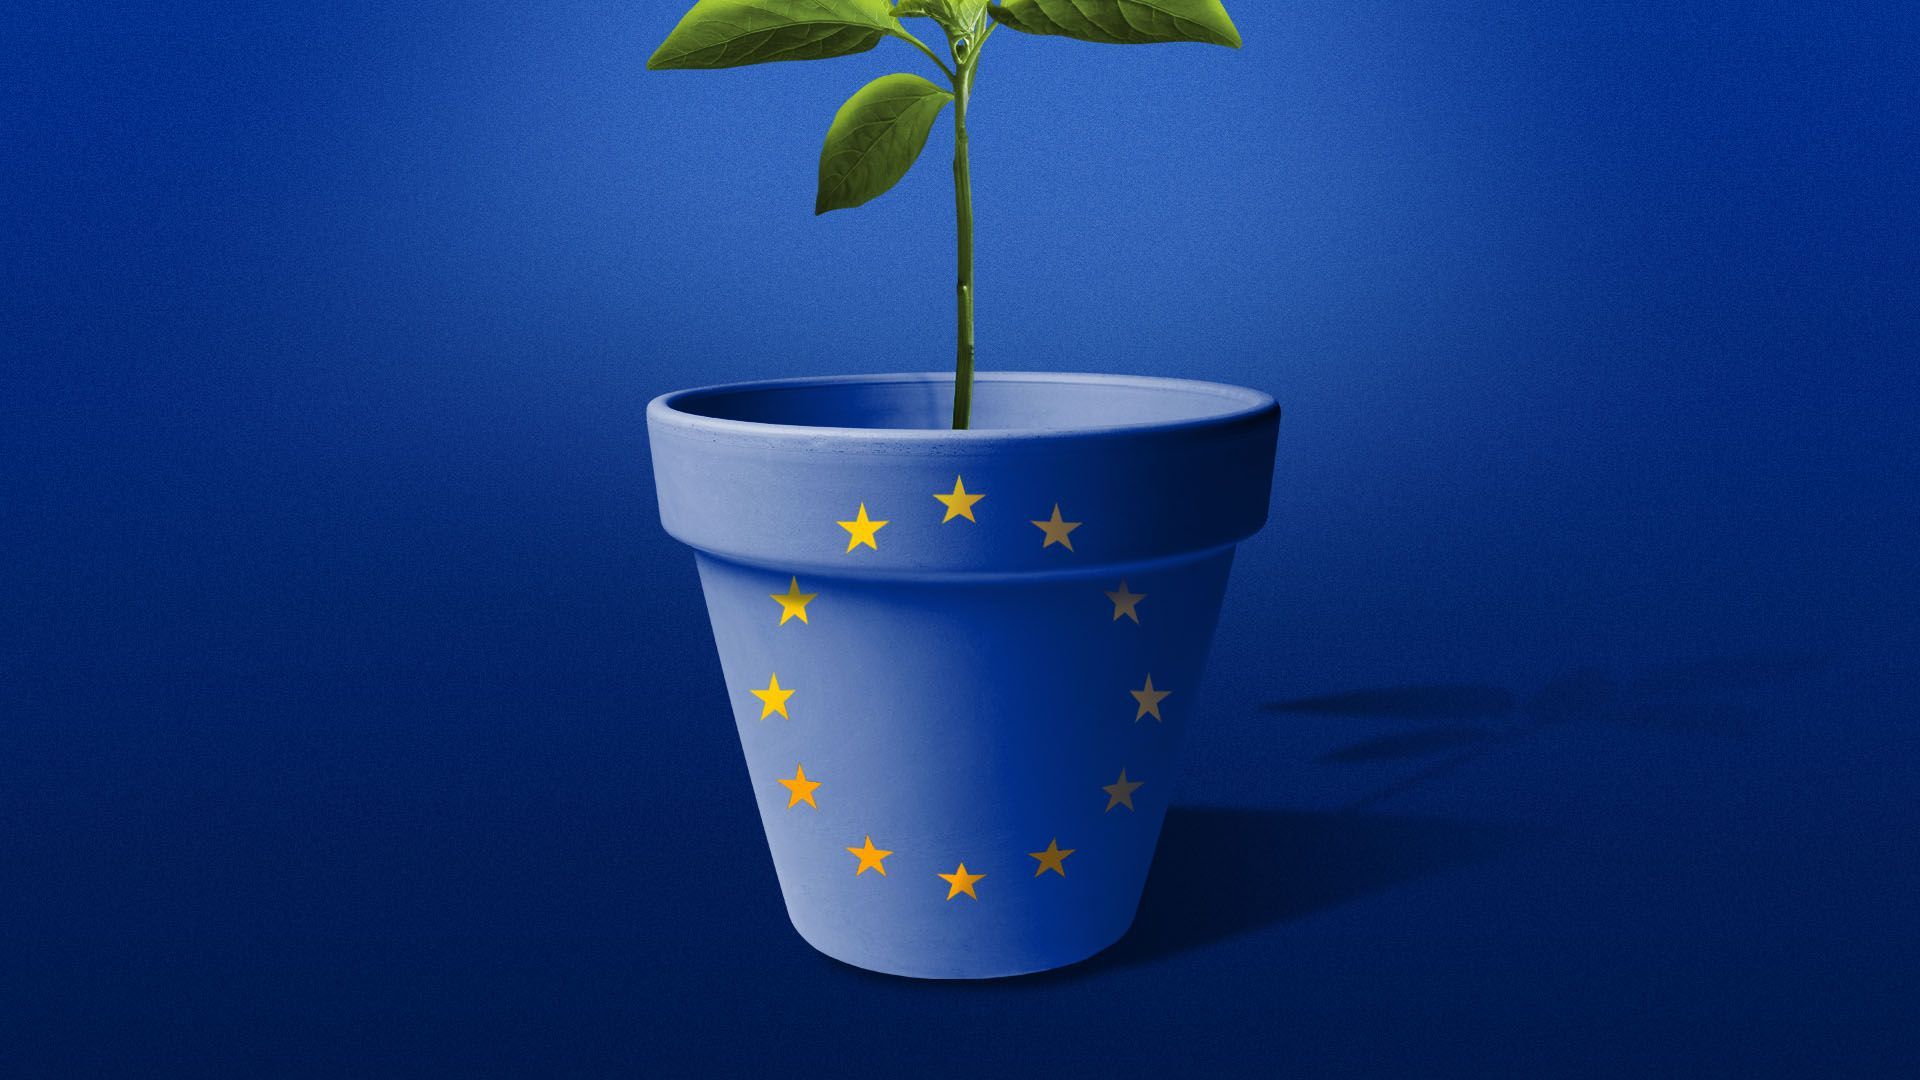 Potted plant on in colors of EU flag